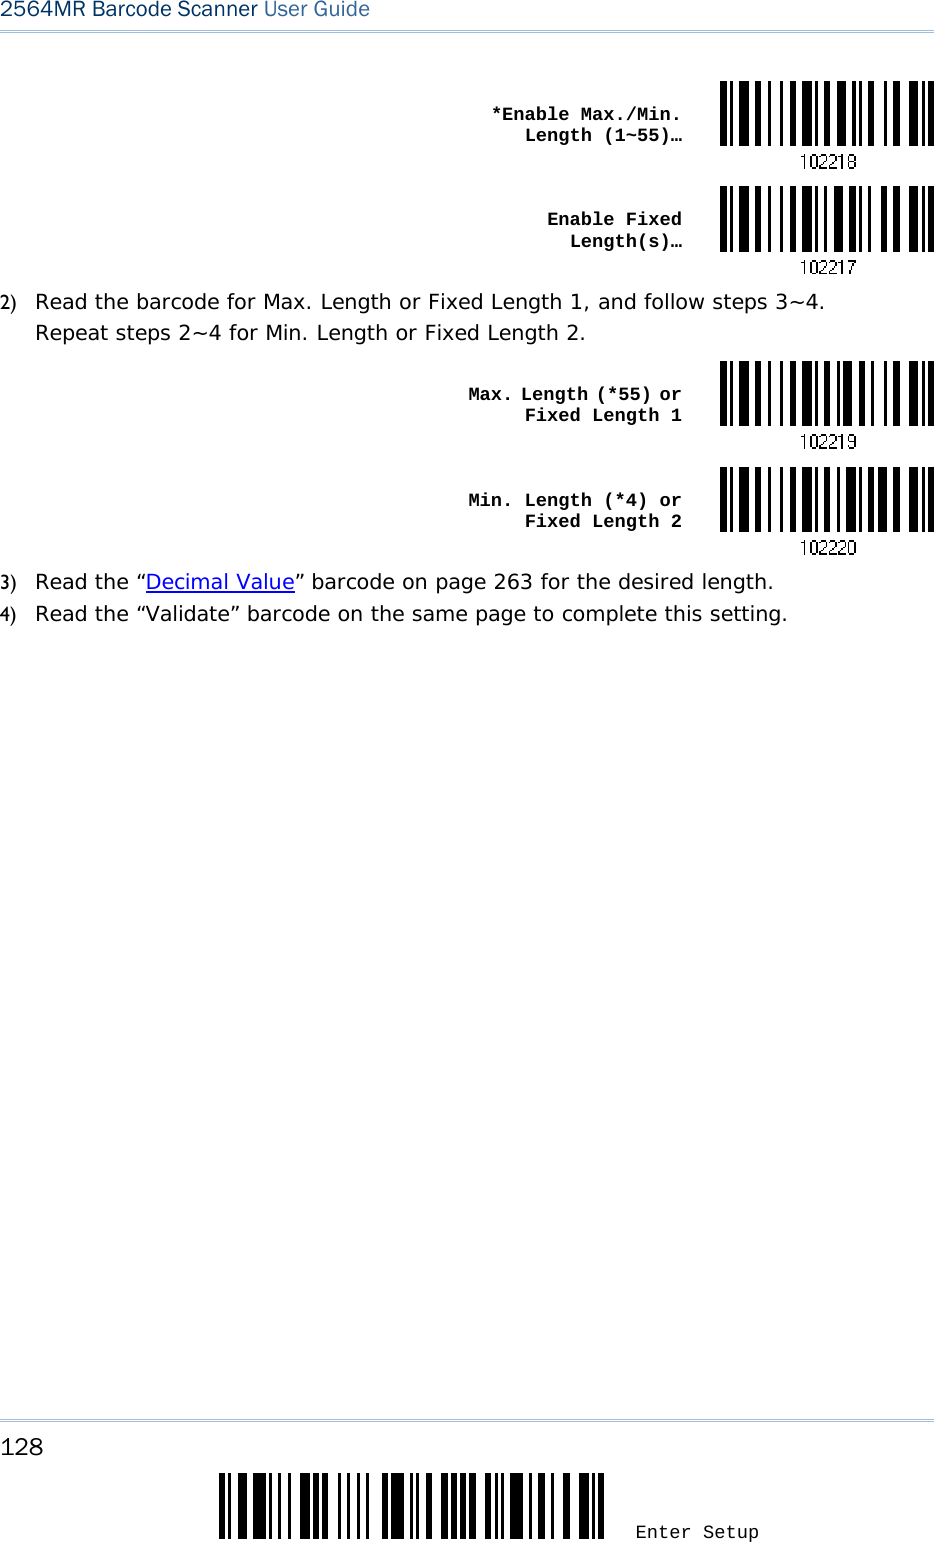 128 Enter Setup 2564MR Barcode Scanner User Guide   *Enable Max./Min. Length (1~55)… Enable Fixed Length(s)…2) Read the barcode for Max. Length or Fixed Length 1, and follow steps 3~4. Repeat steps 2~4 for Min. Length or Fixed Length 2.  Max. Length (*55) or Fixed Length 1 Min. Length (*4) or Fixed Length 23) Read the “Decimal Value” barcode on page 263 for the desired length.  4) Read the “Validate” barcode on the same page to complete this setting.  